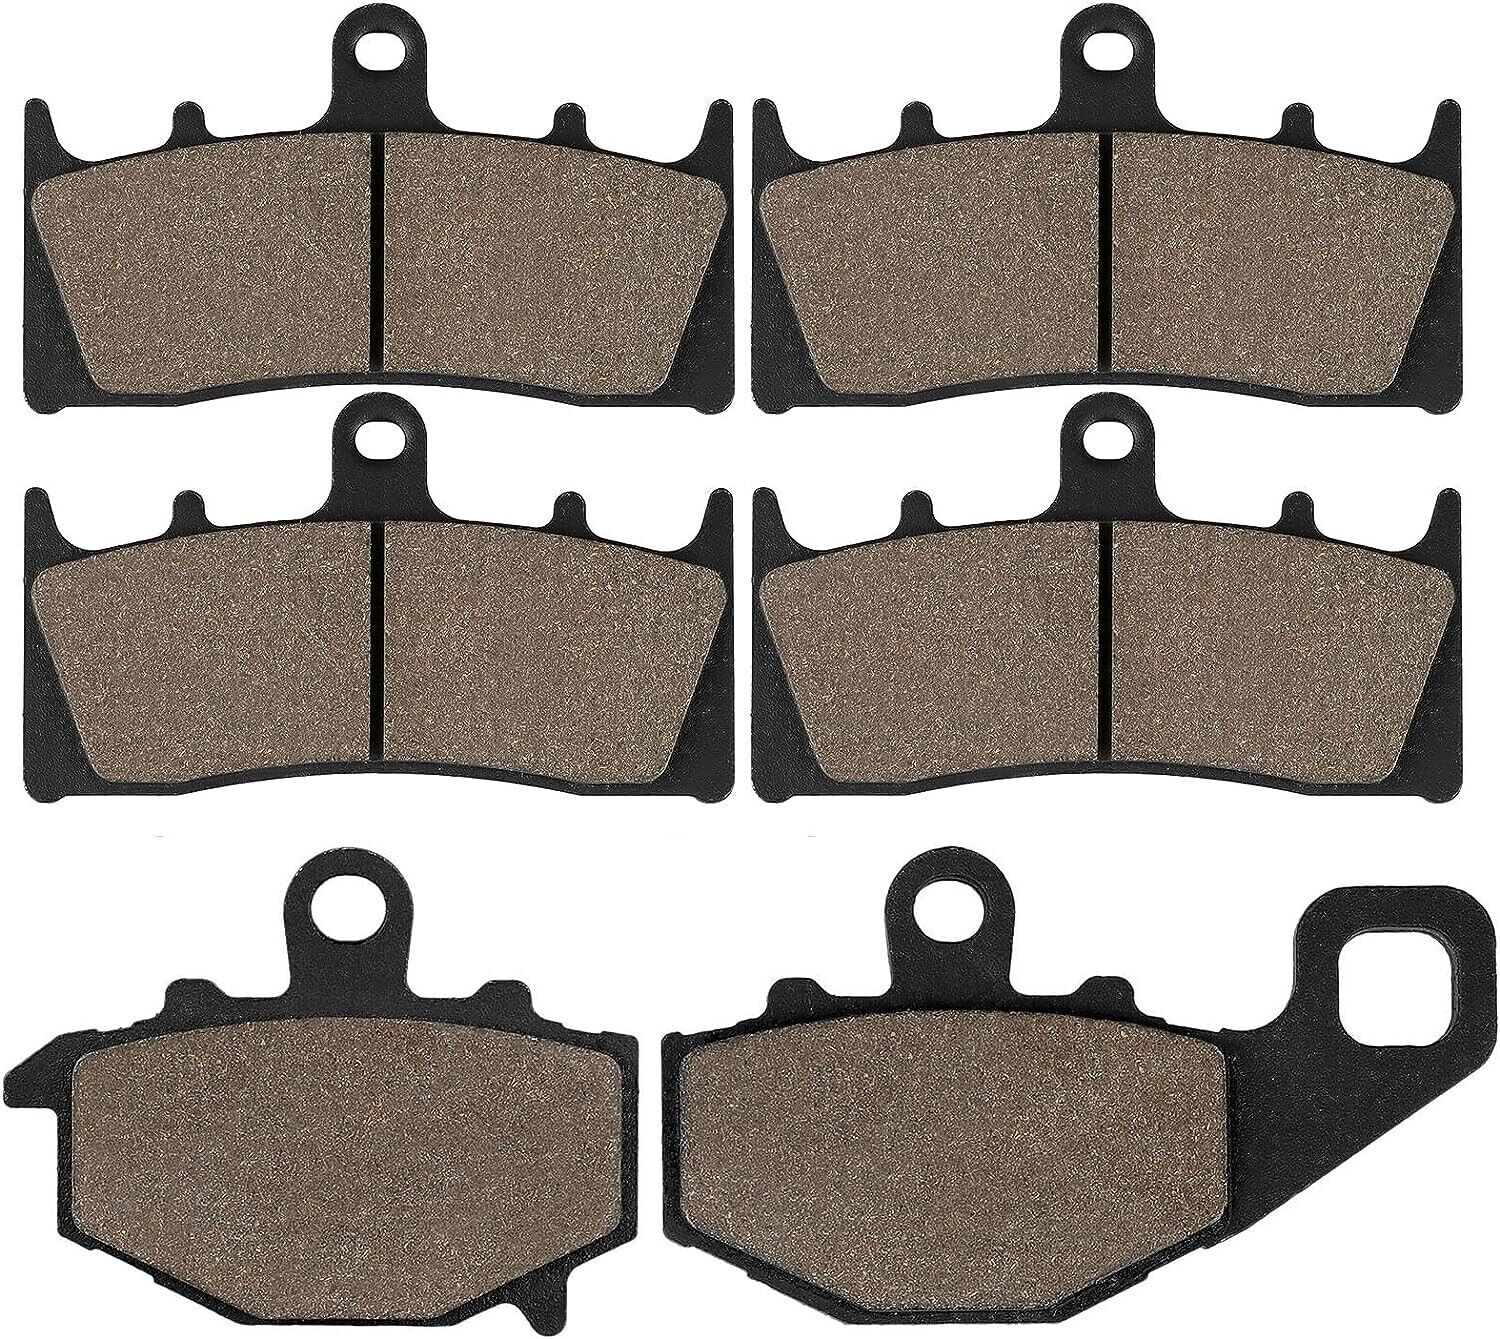 Front and Rear Brake Pads for Kawasaki ZX6R ZX-6R ZX600 1998-2001, ZZR600 ZX 600